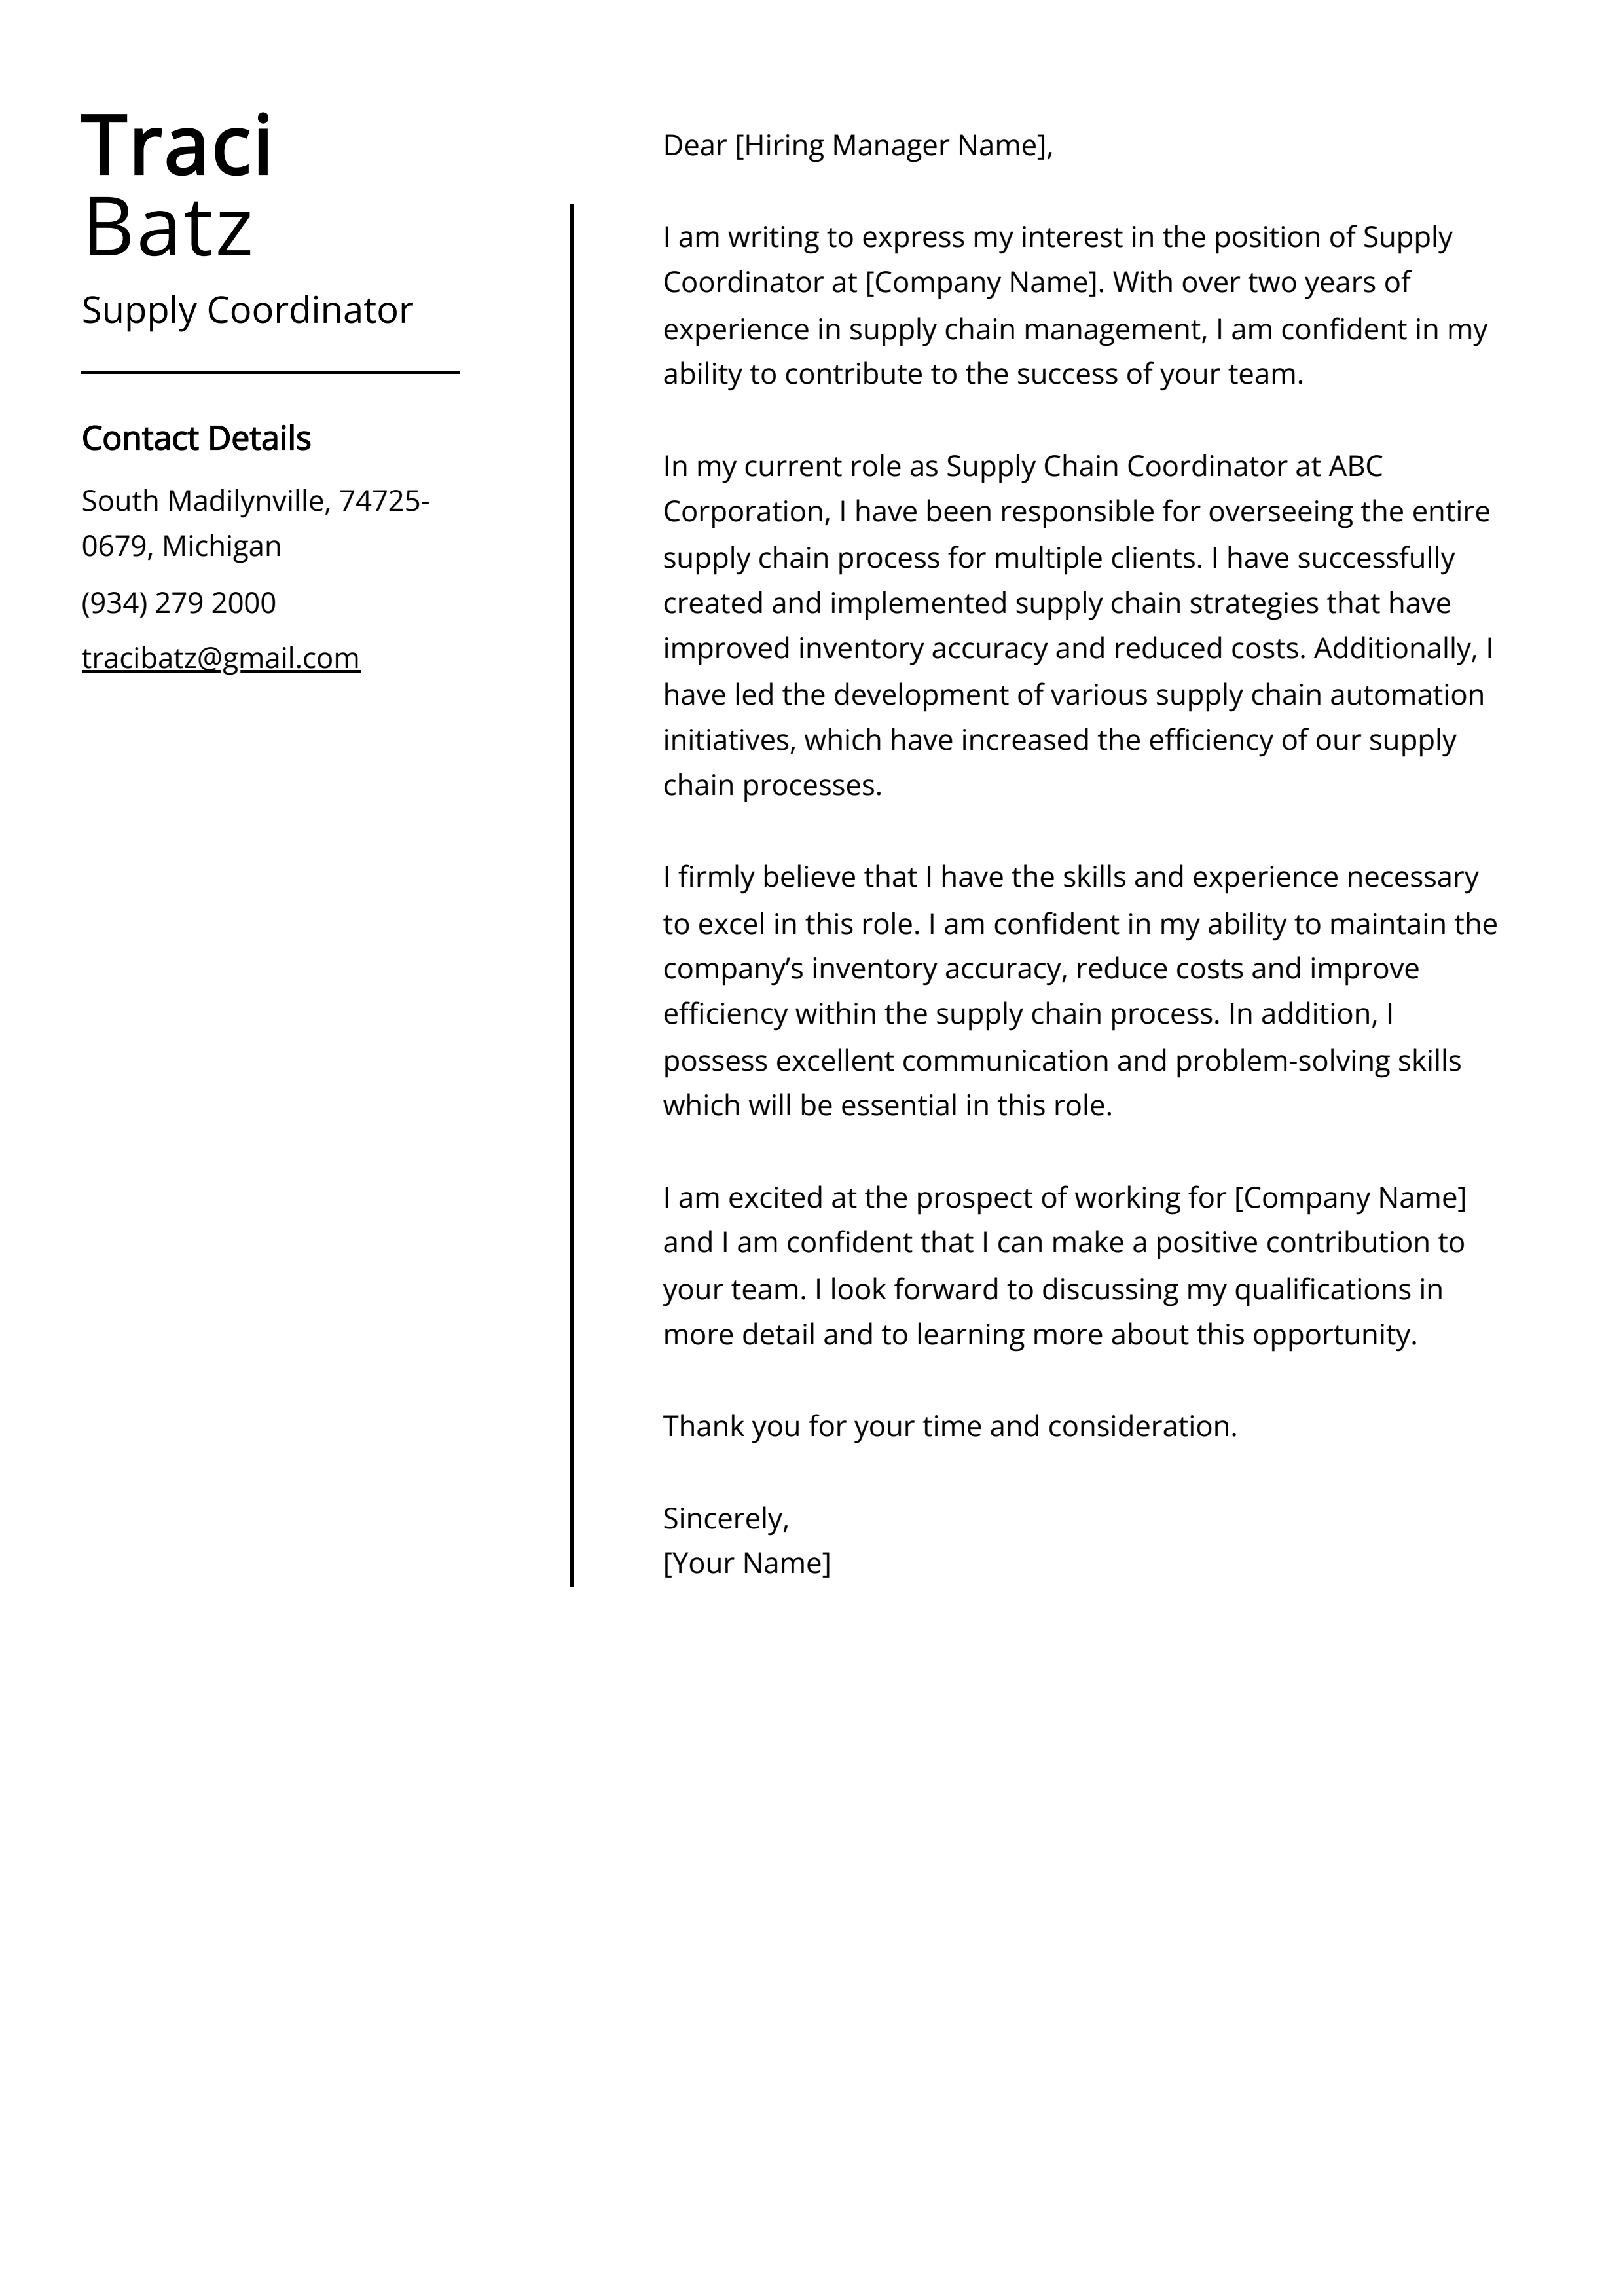 Supply Coordinator Cover Letter Example